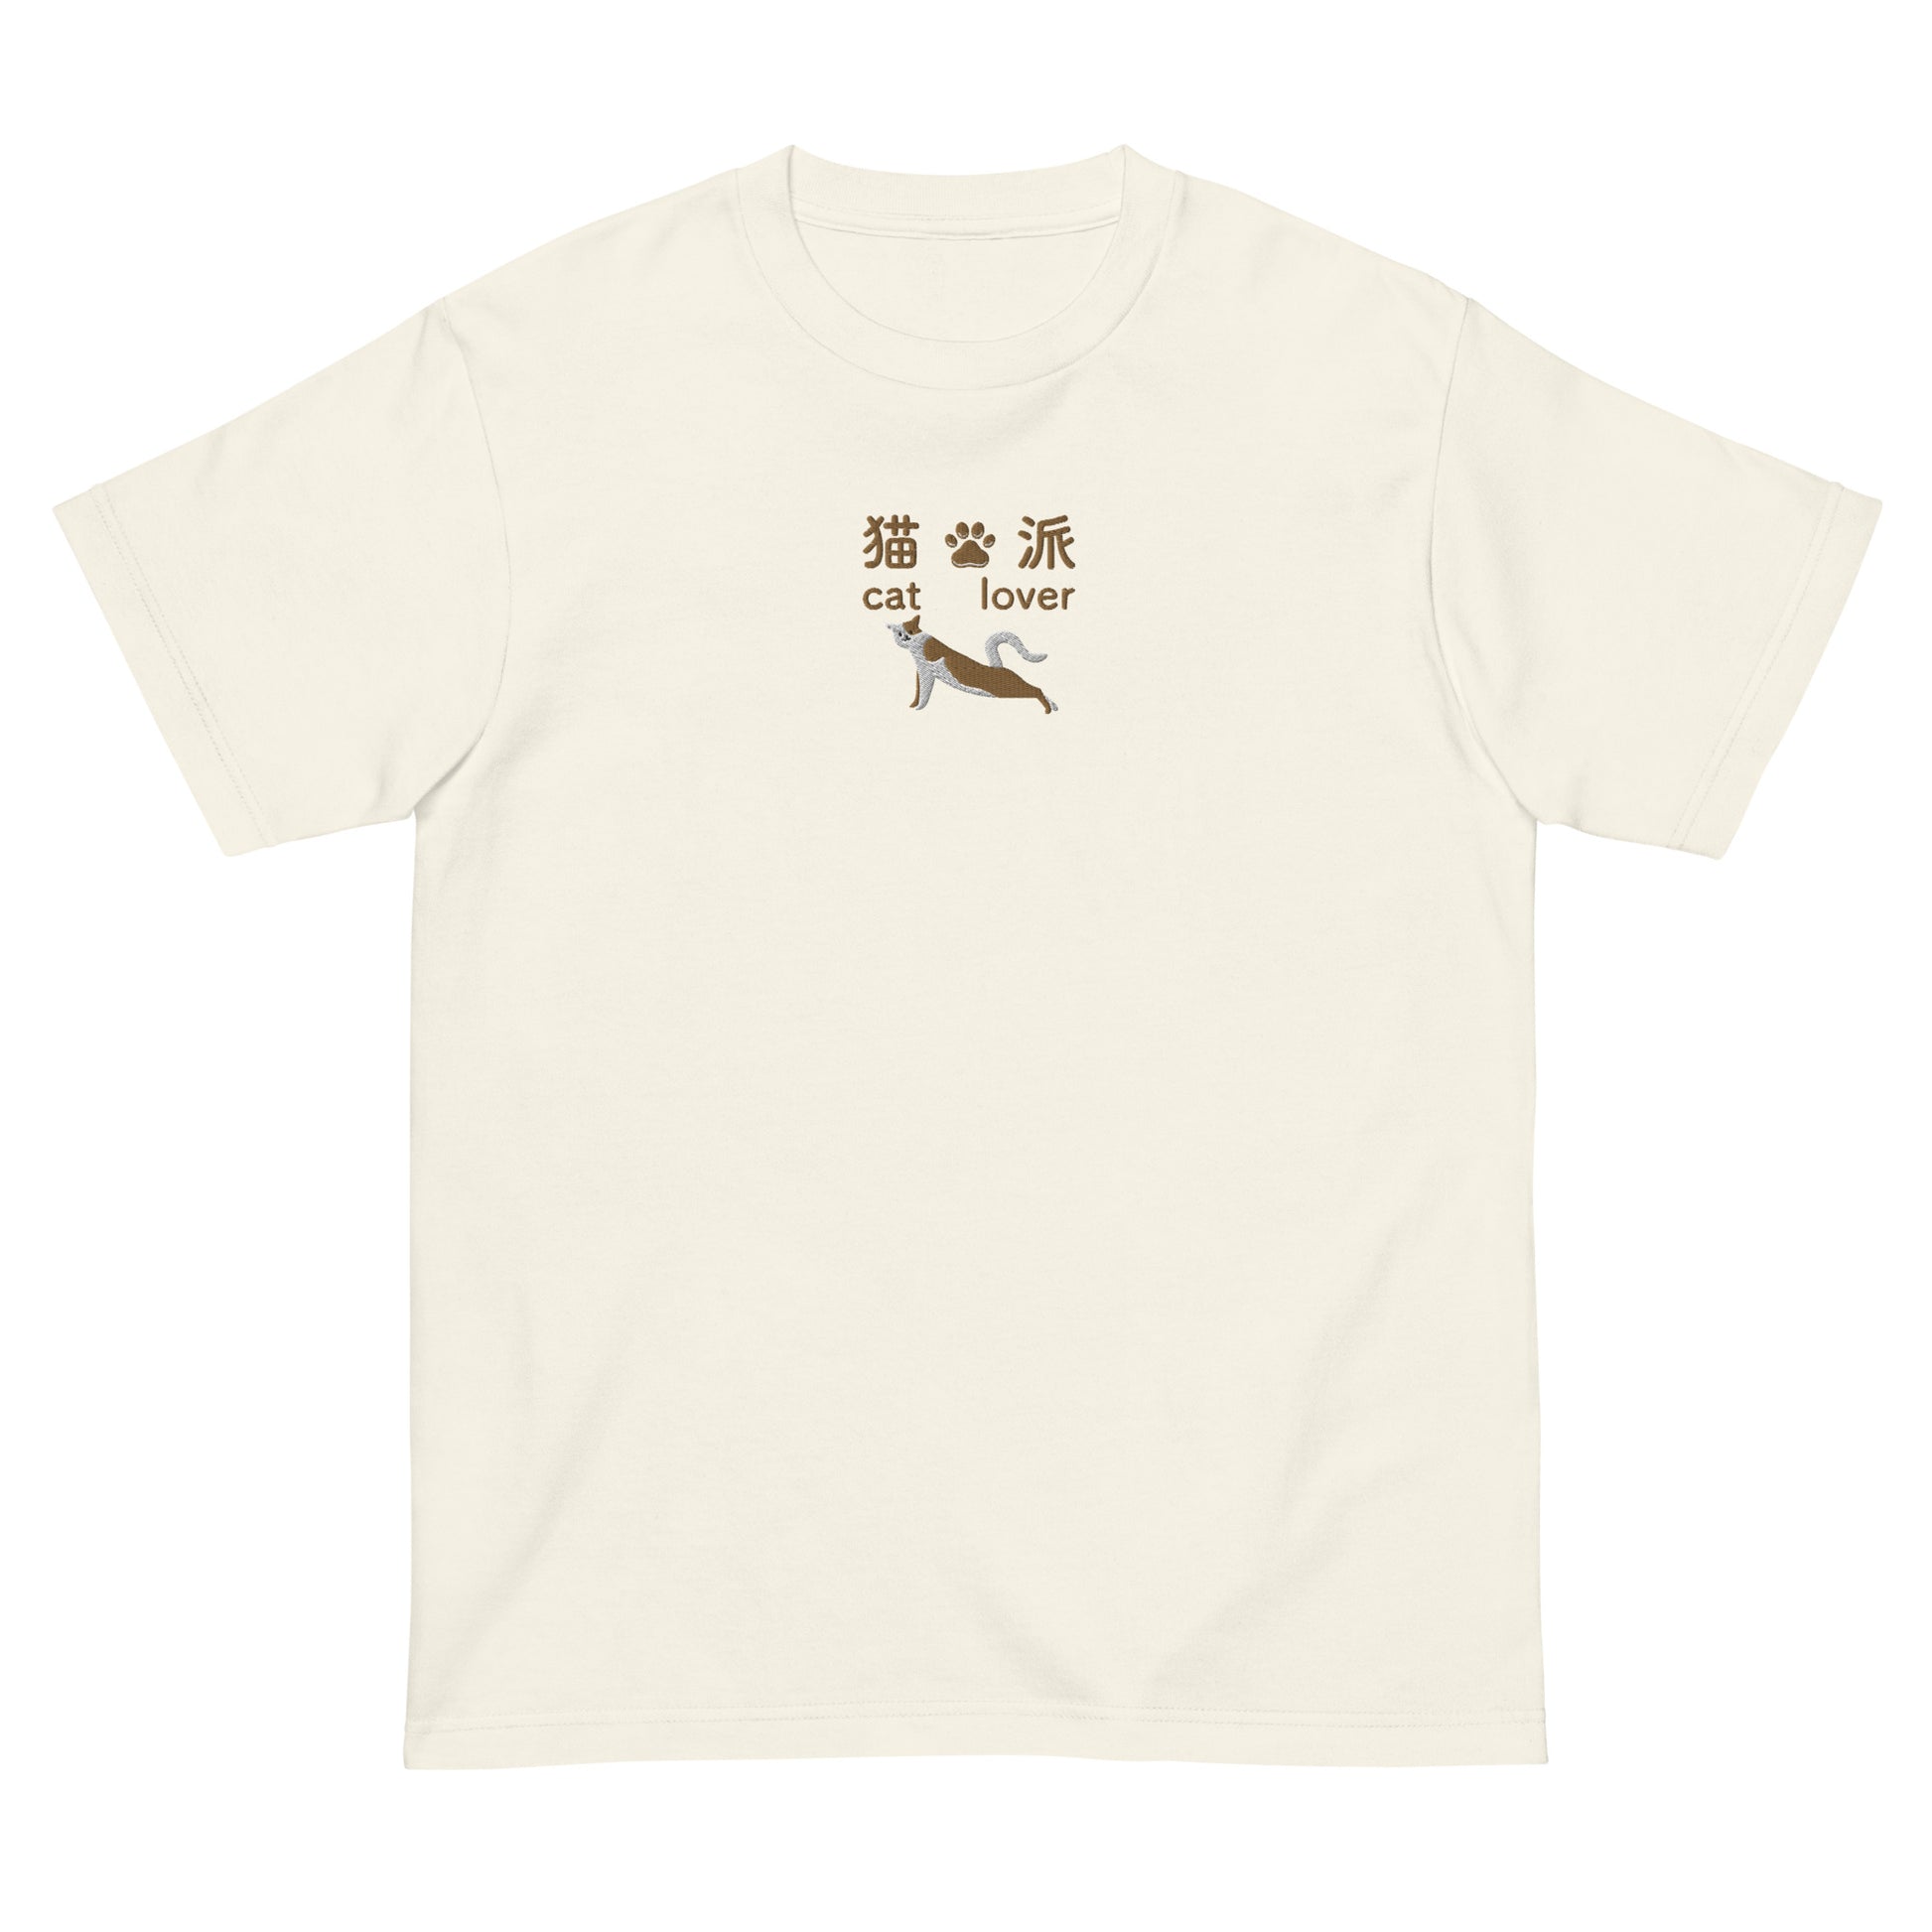 Ivory High Quality Tee - Front Design with an Brown, White Embroidery "Cat Lover" in Japanese,Chinese and English, and Cat  Embroidery 